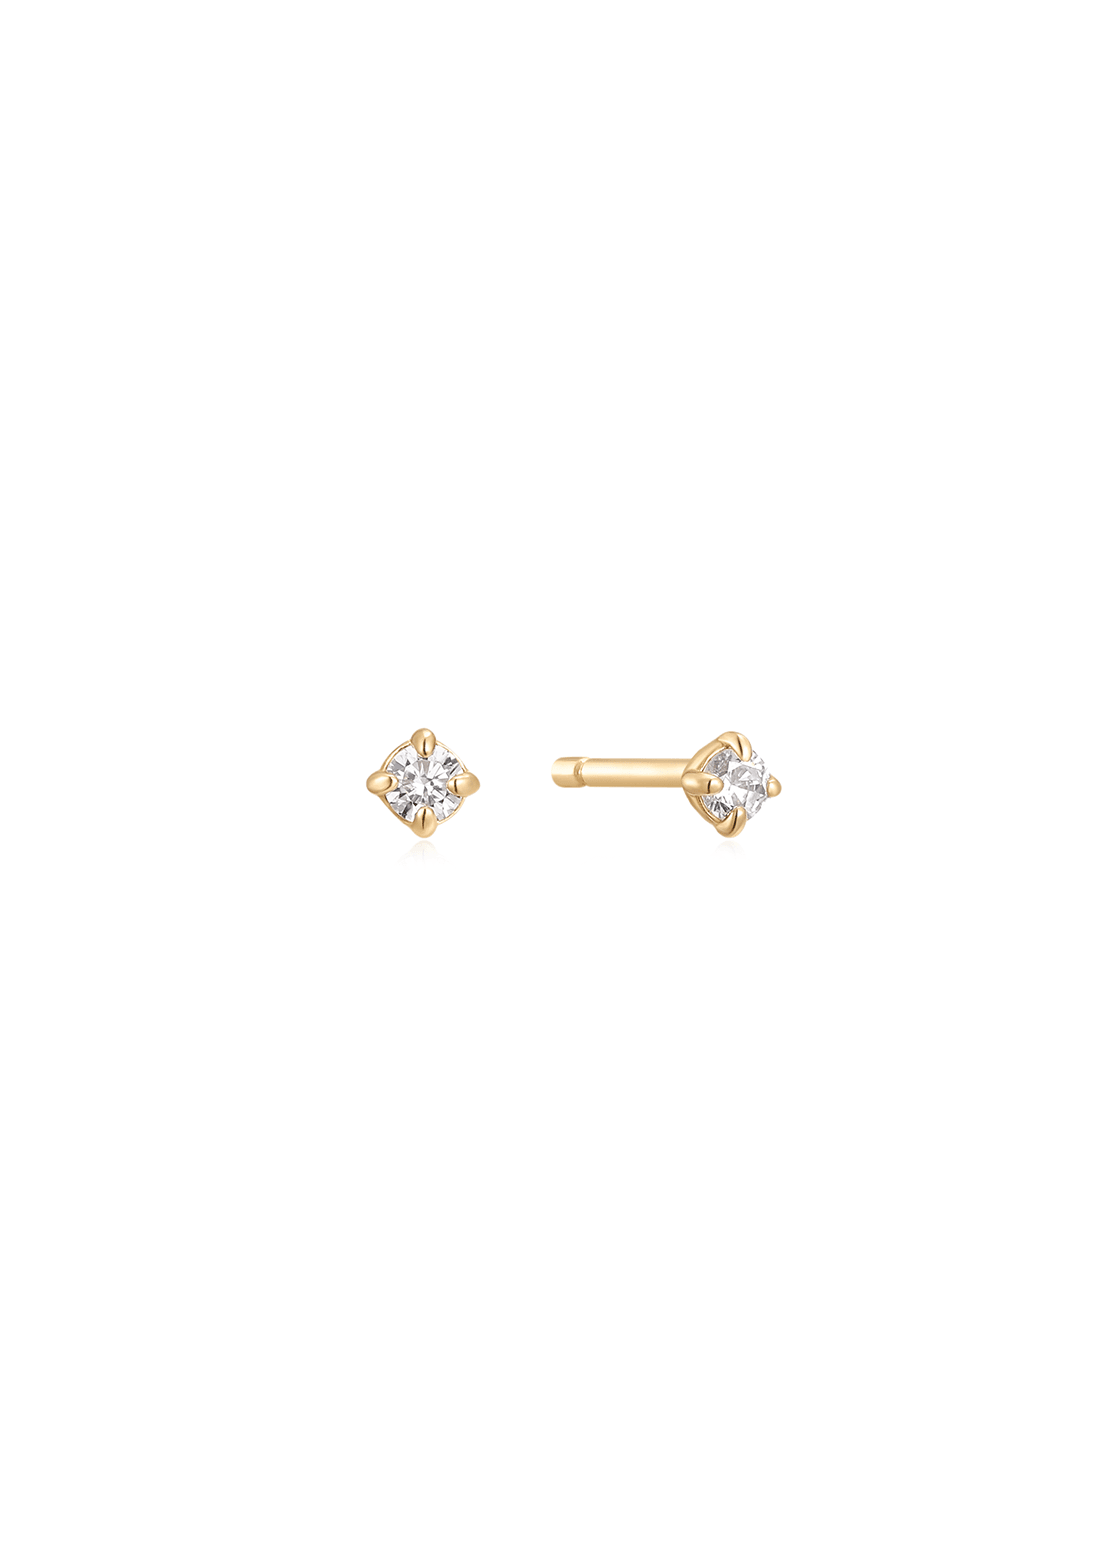 The Lune Cultured Diamond 9ct Solid Gold Stud Earring (Single) - Molten Store